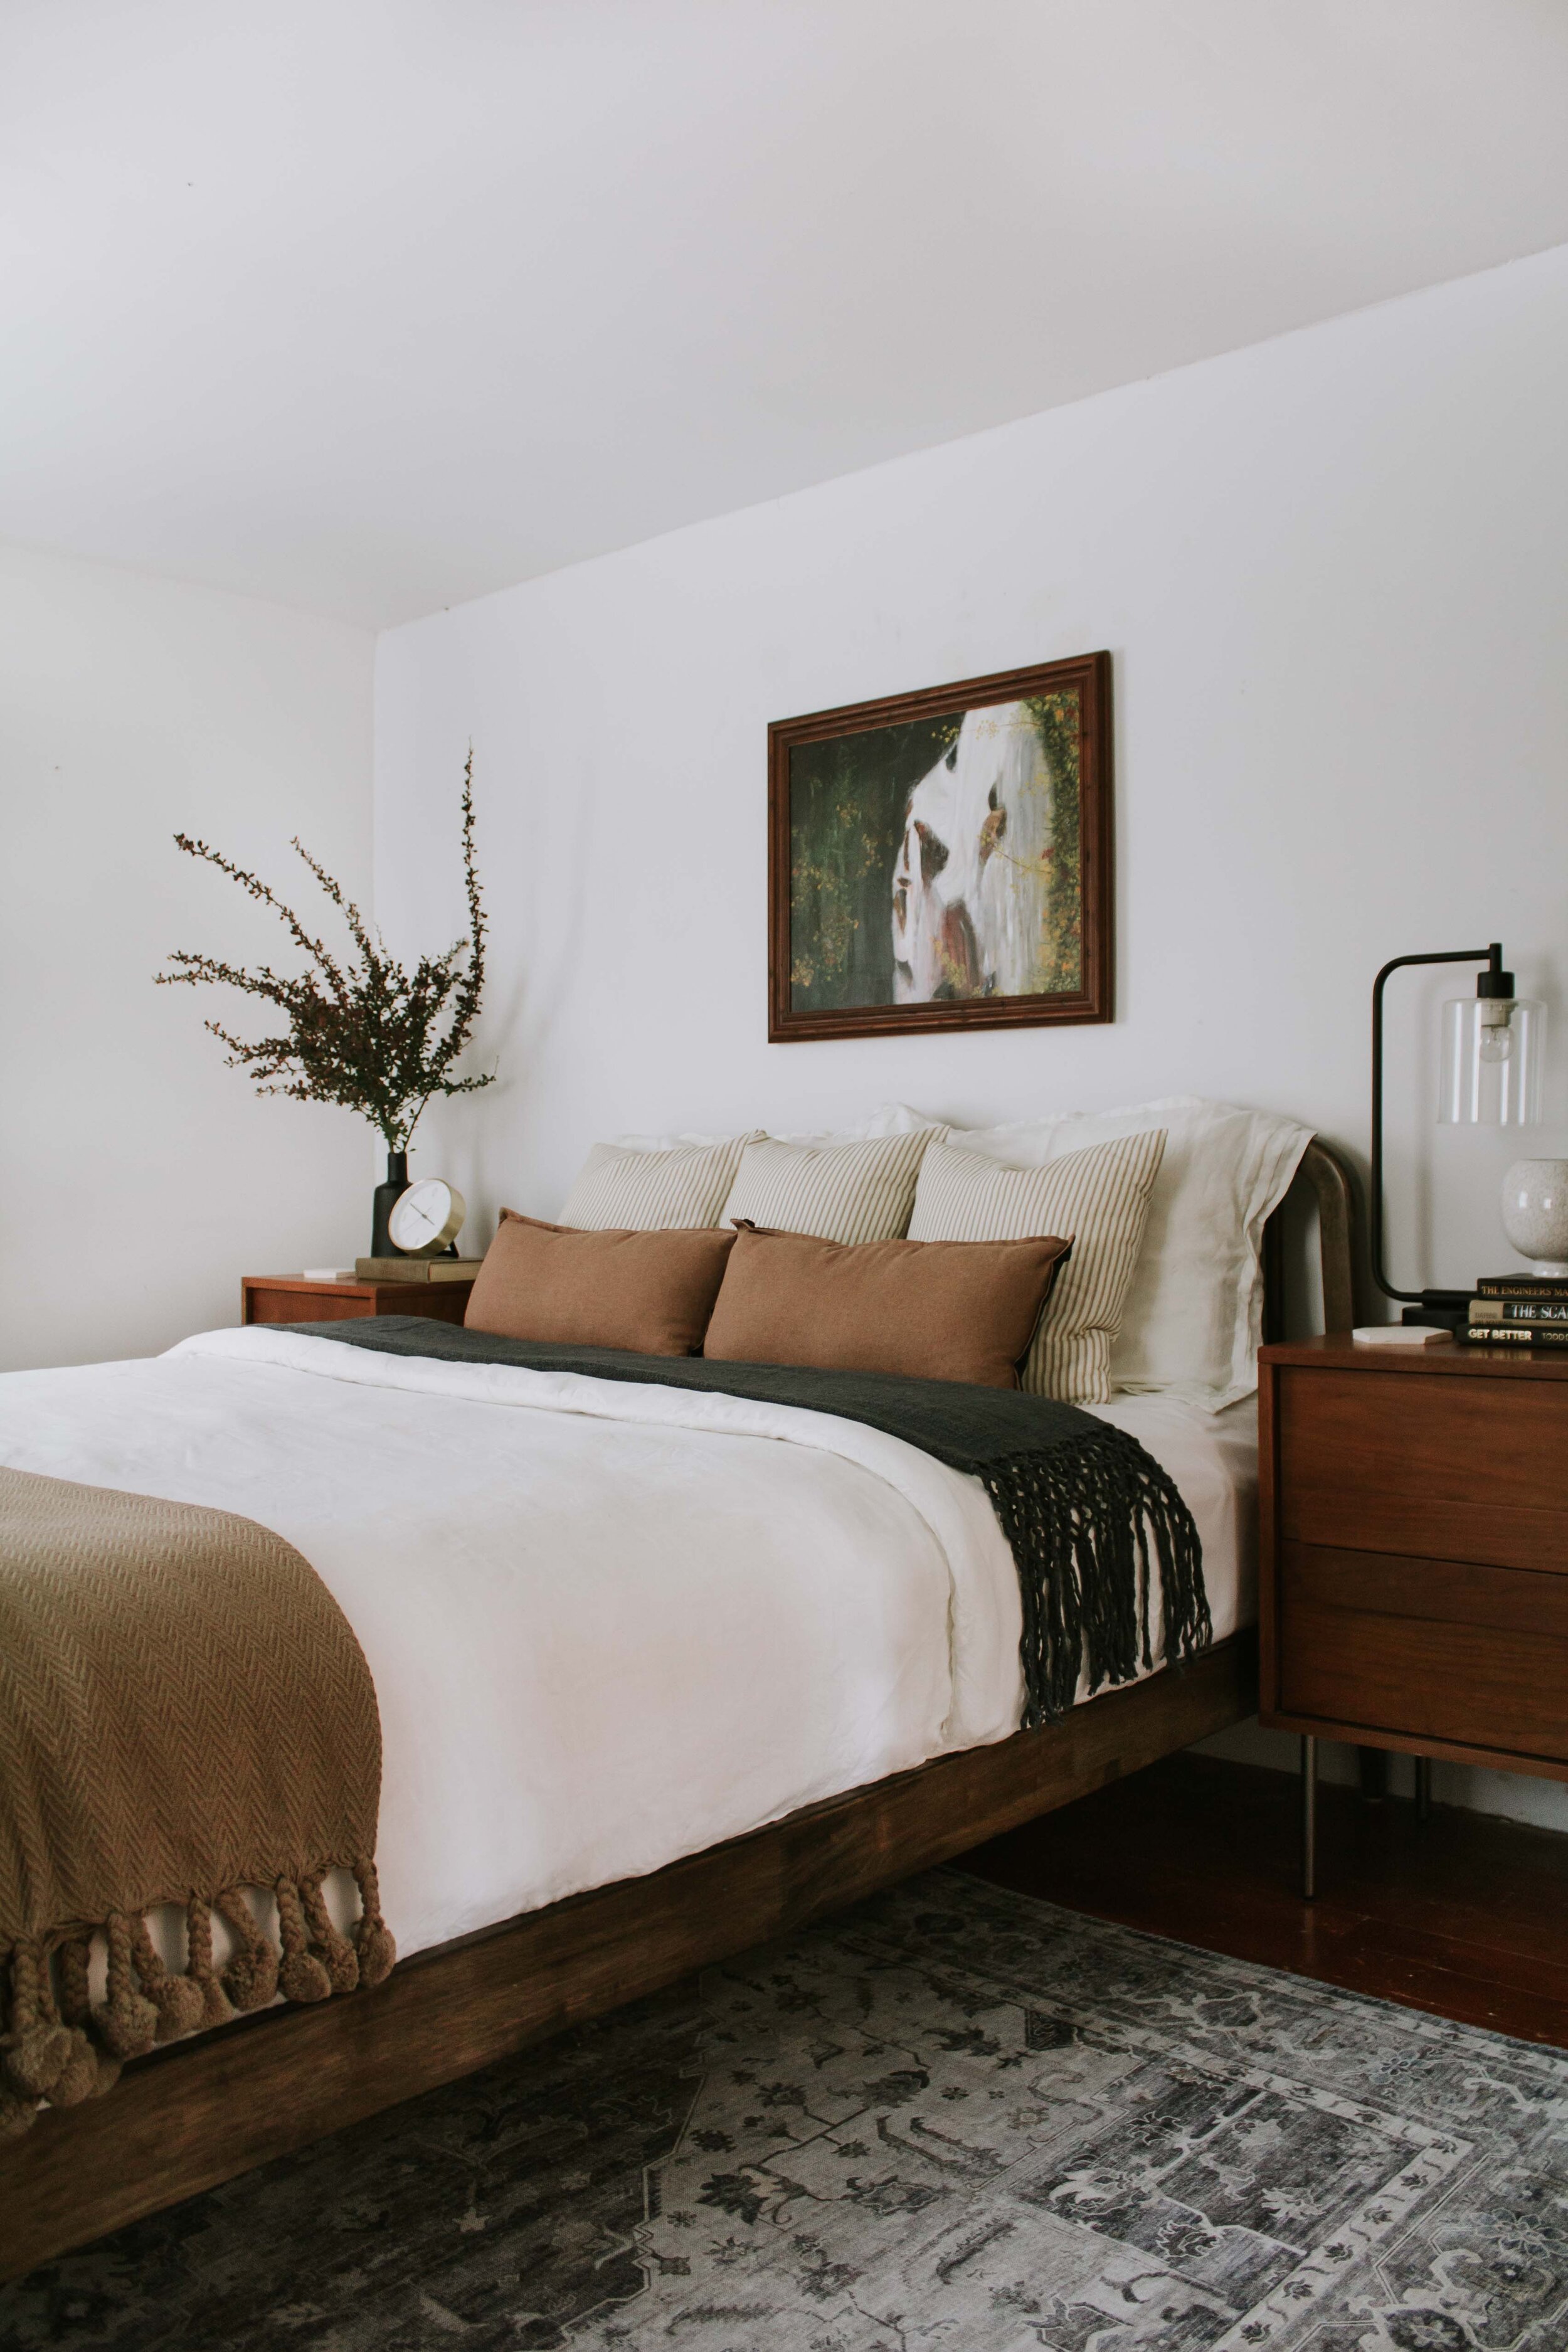 Our Bedroom "As Is" and 9 spindle bed alternatives - modern traditional bedroom decor and cozy bedroom inspiration. | Nadine Stay